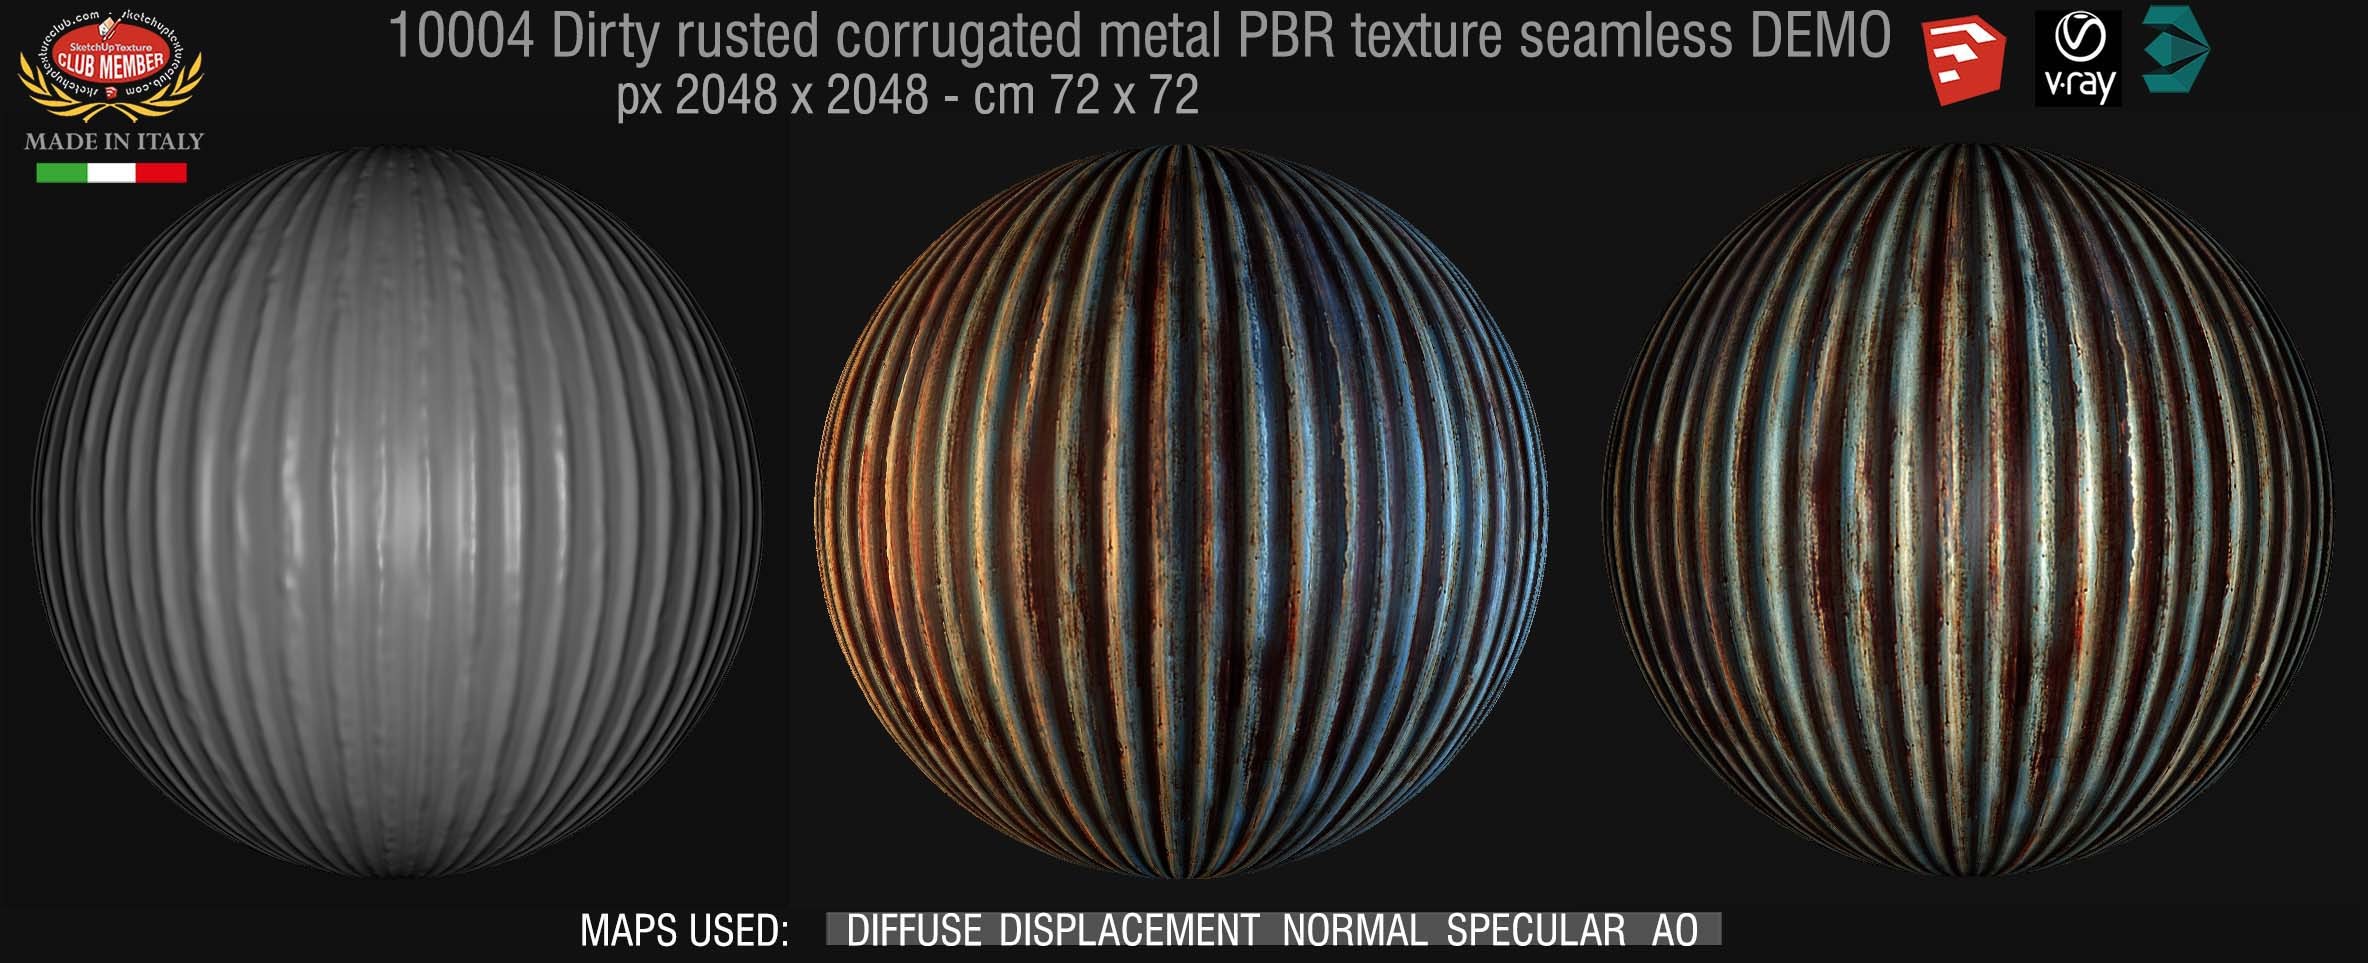 10004 Dirty rusted corrugated metal PBR texture seamless DEMO